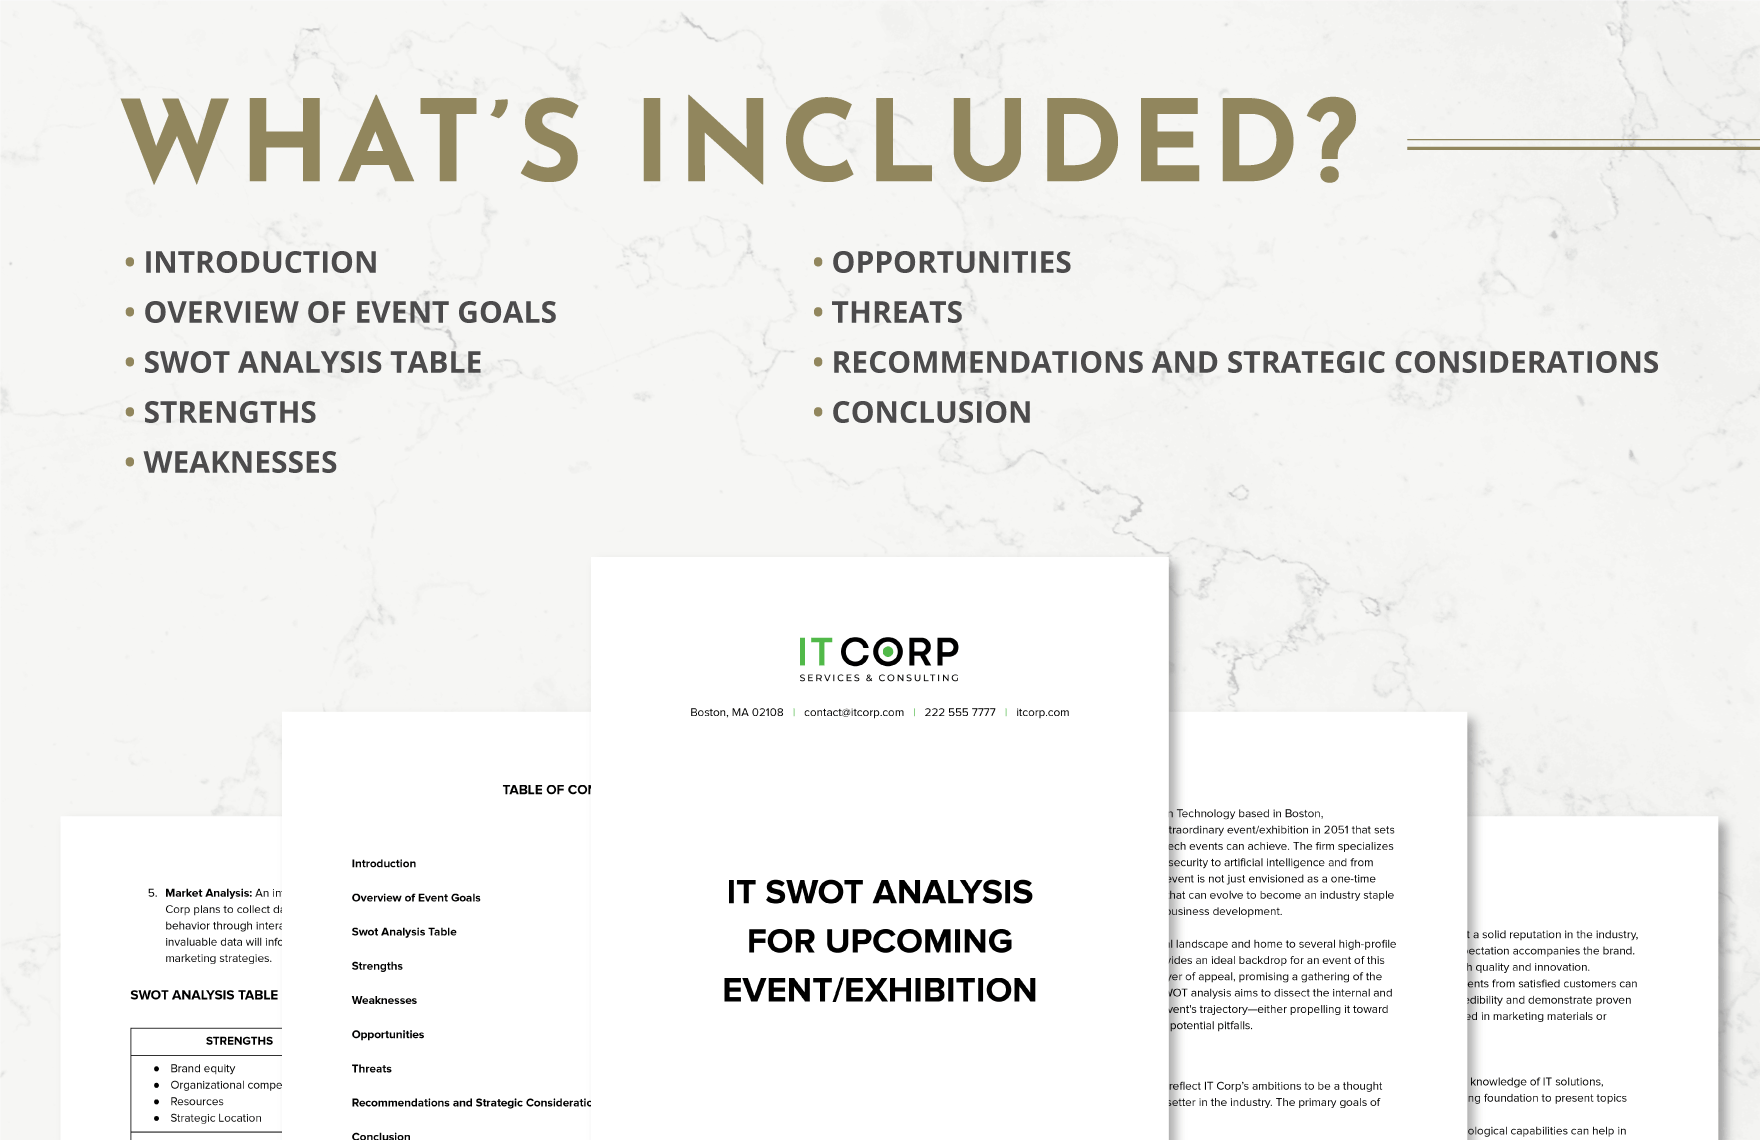 IT SWOT Analysis for Upcoming Event/Exhibition Template